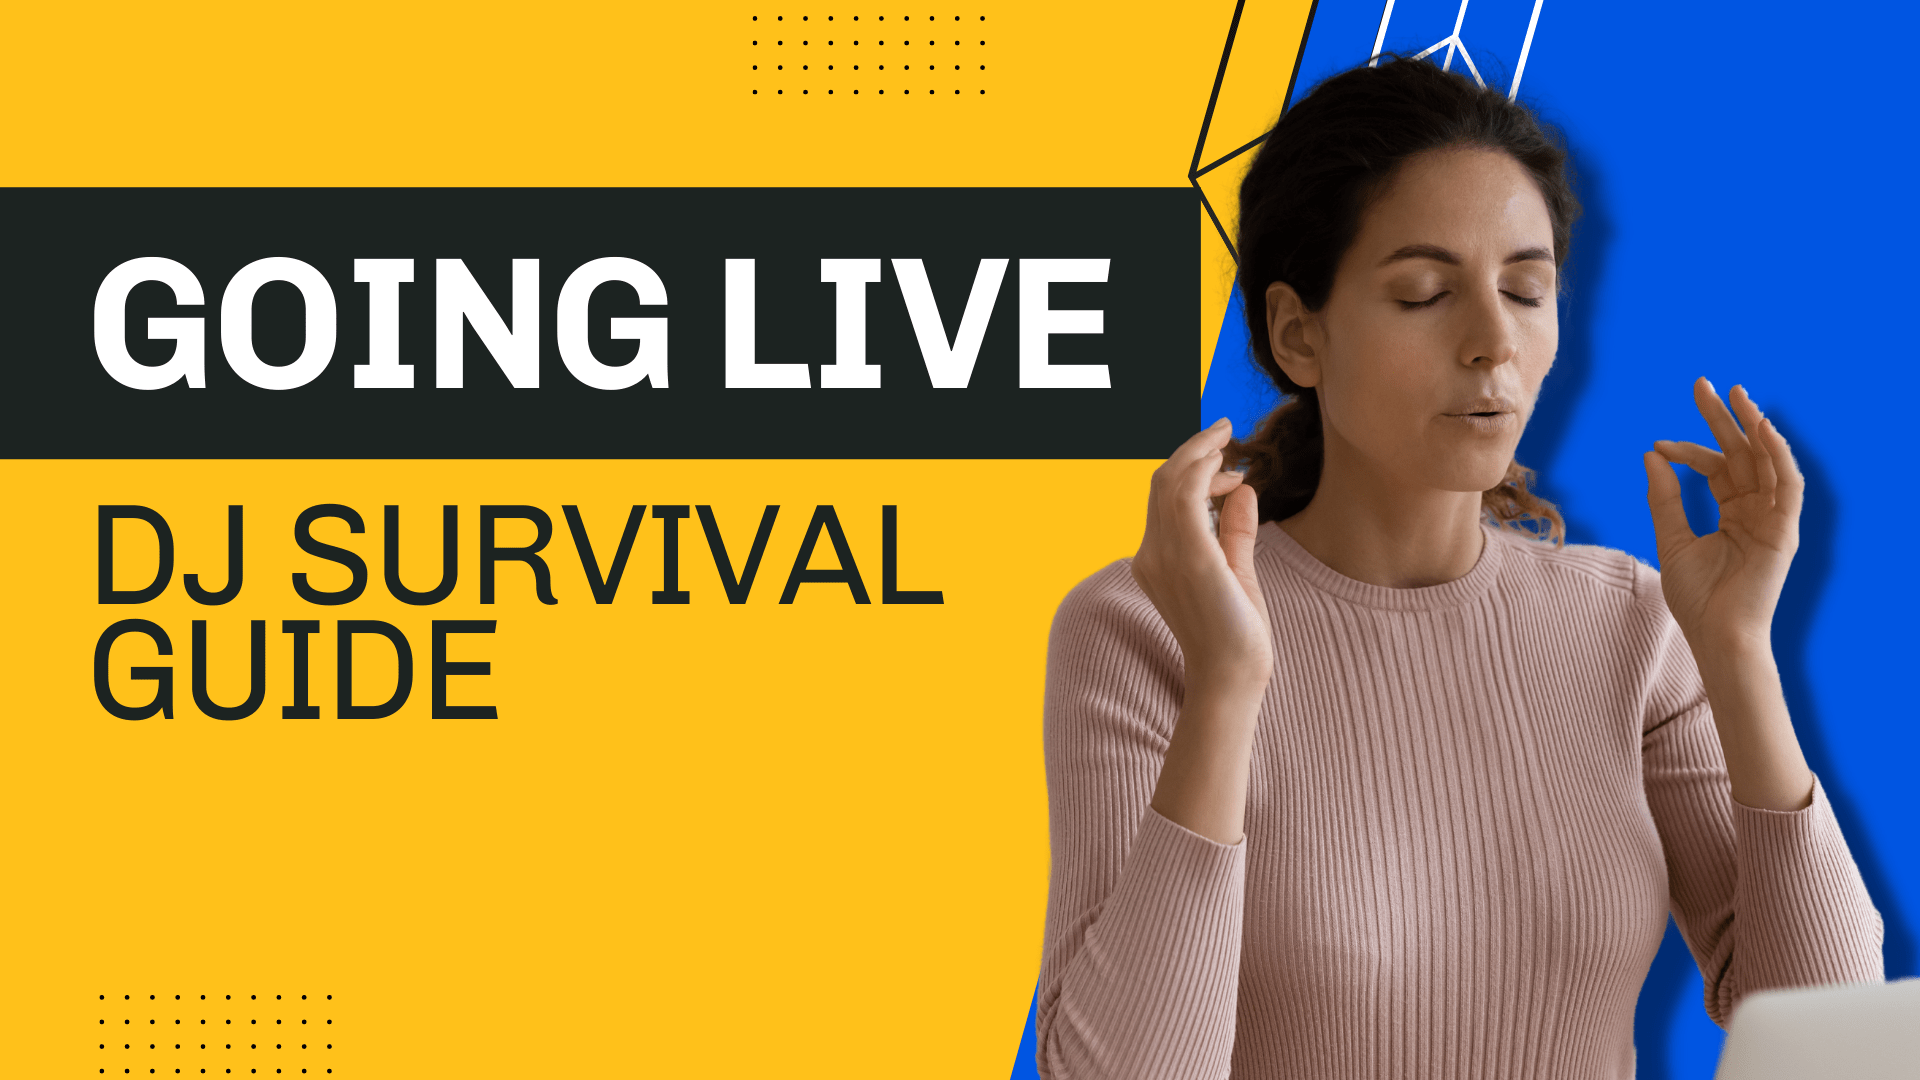 7 Tips to Get in the Groove Before Going Live